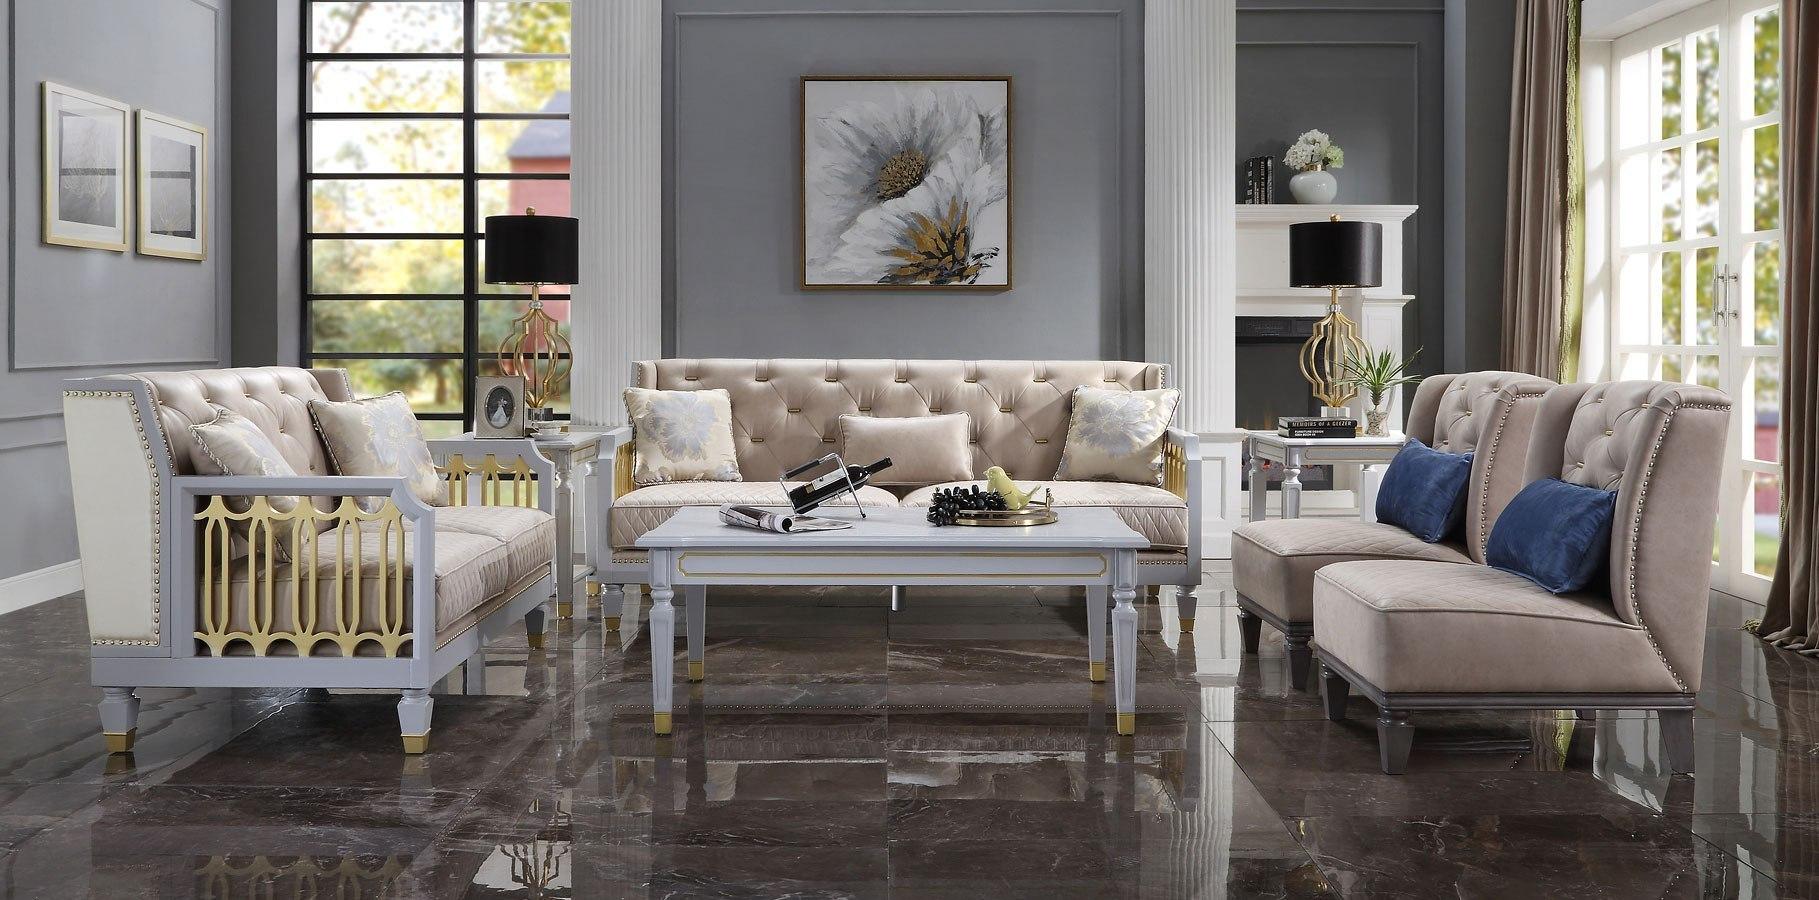 Modern, Classic Sofa Loveseat Accent Chair Coffee Table House Marchese 58865-6pcs in Beige PU